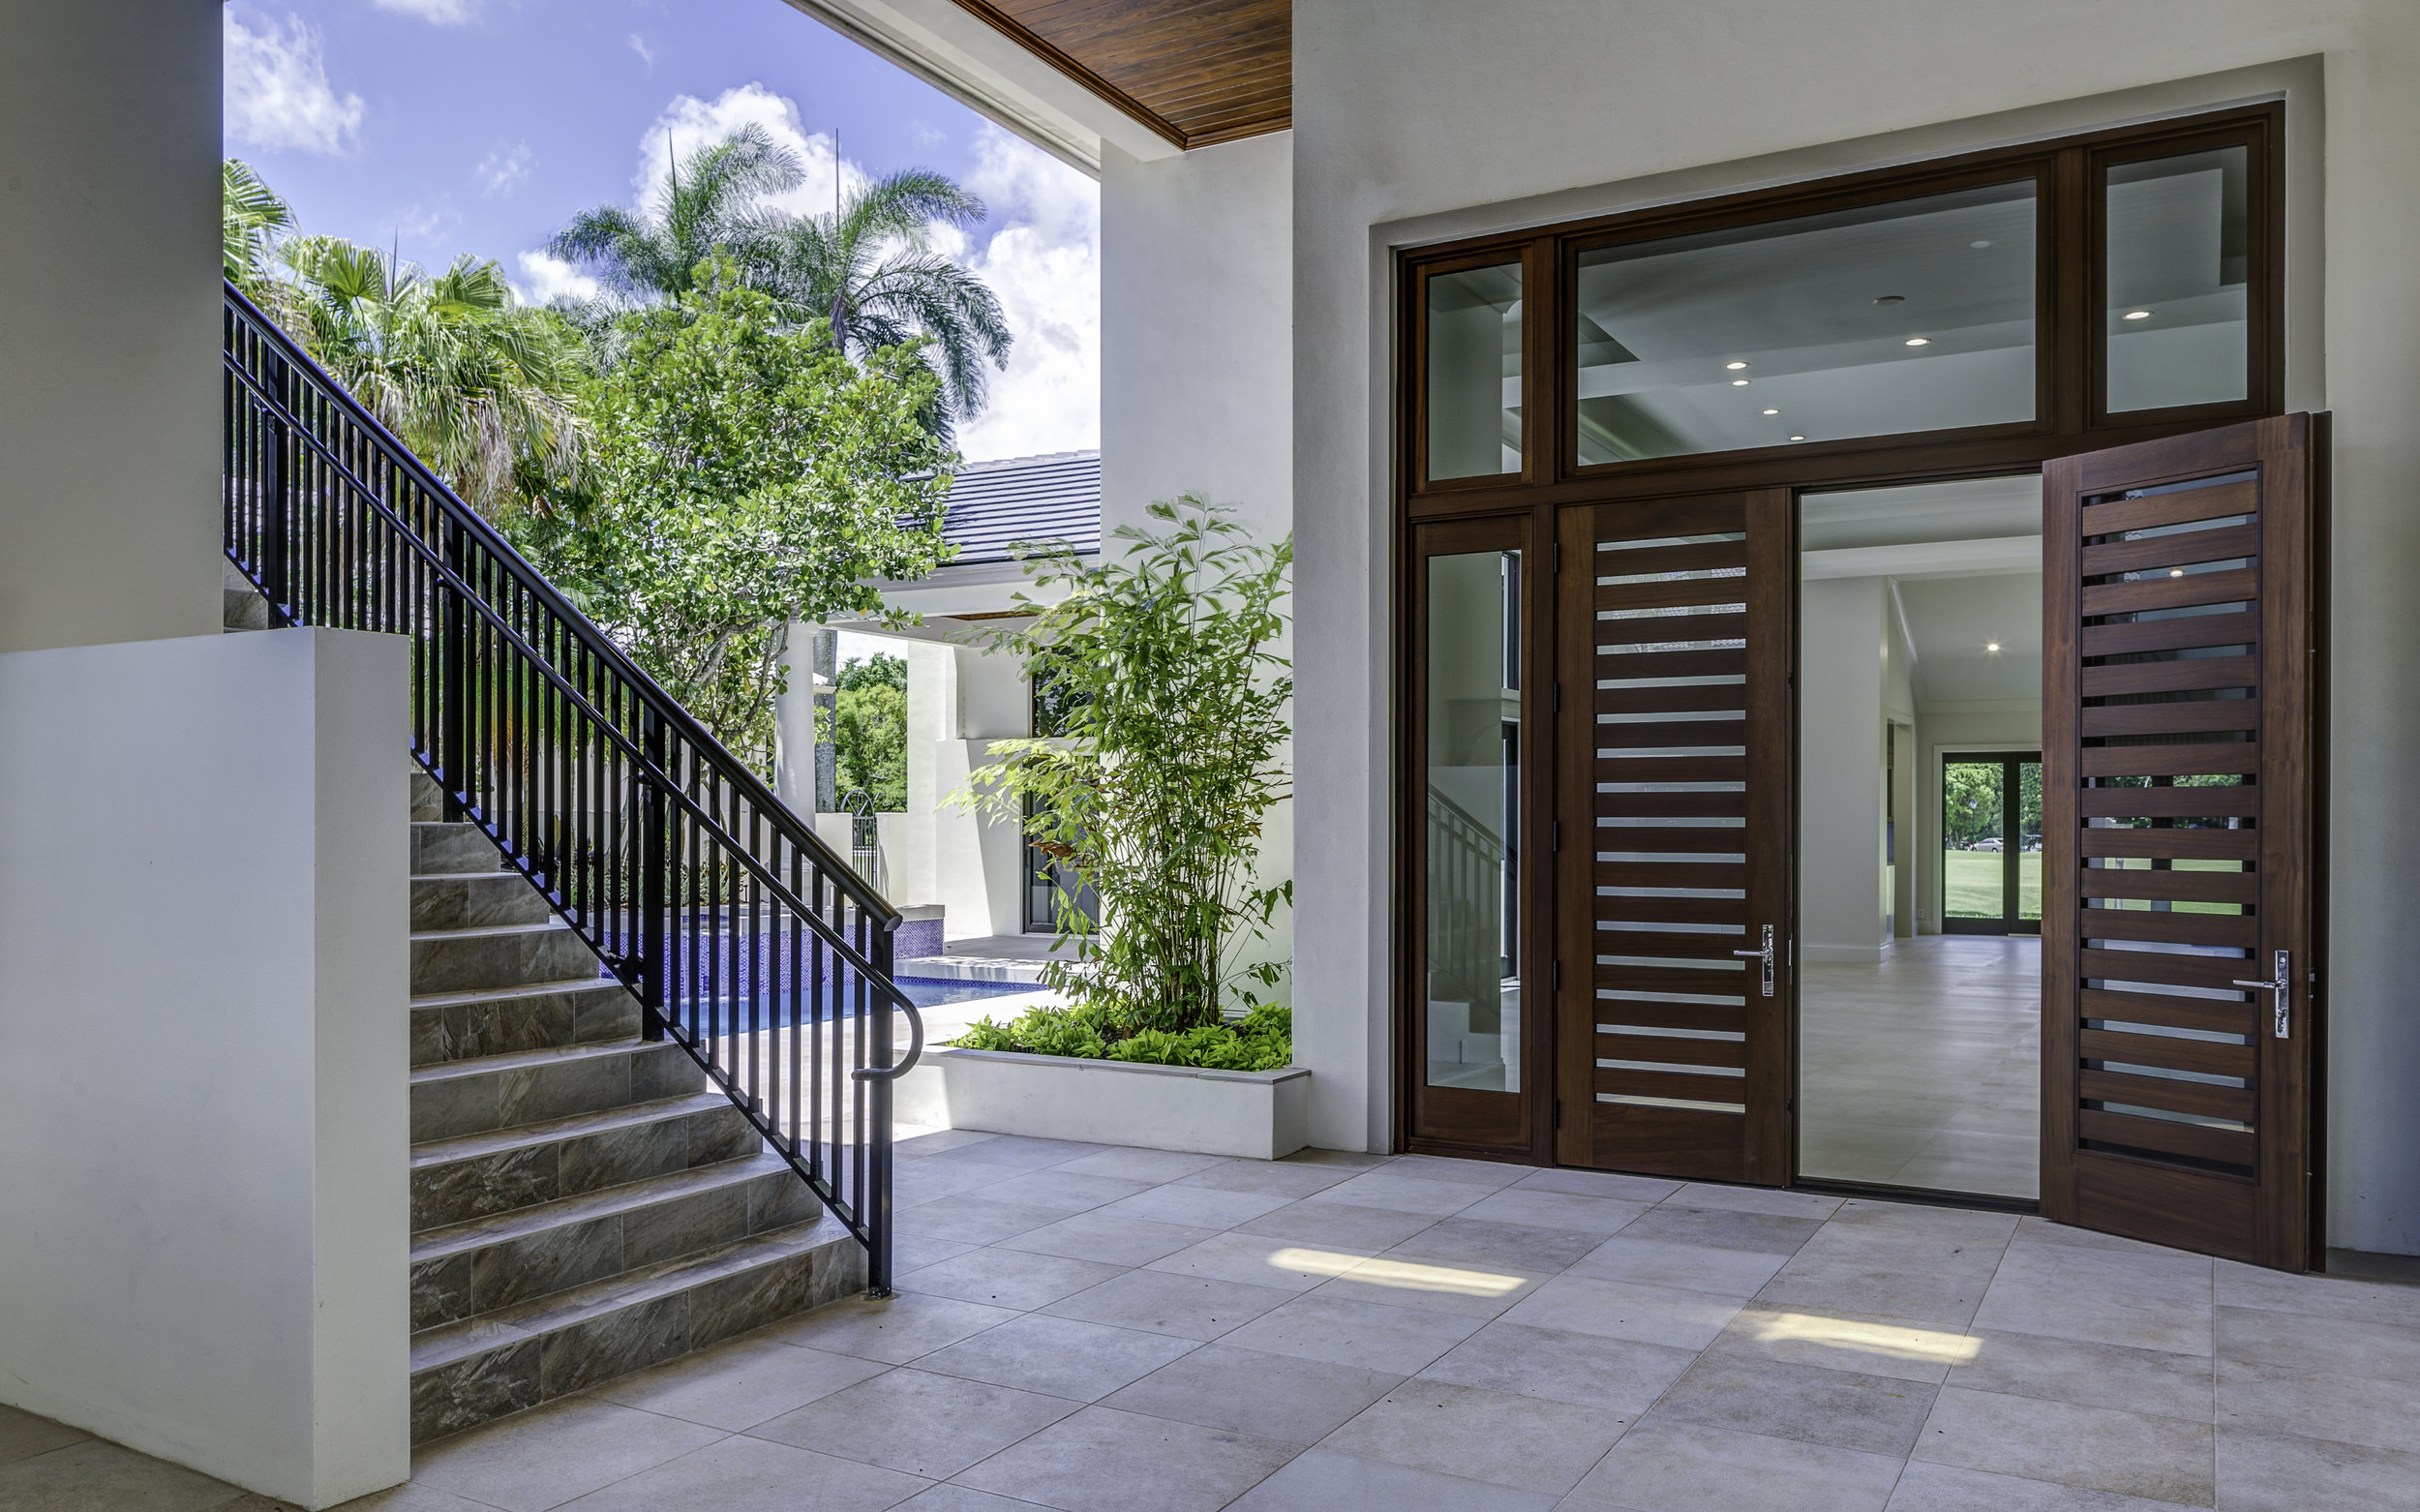 mag real estate & development construction general contractor builder renovation south florida boca raton new custom luxury home for sale interior design st. andrews country club 7228 queenferry circle 4.jpg